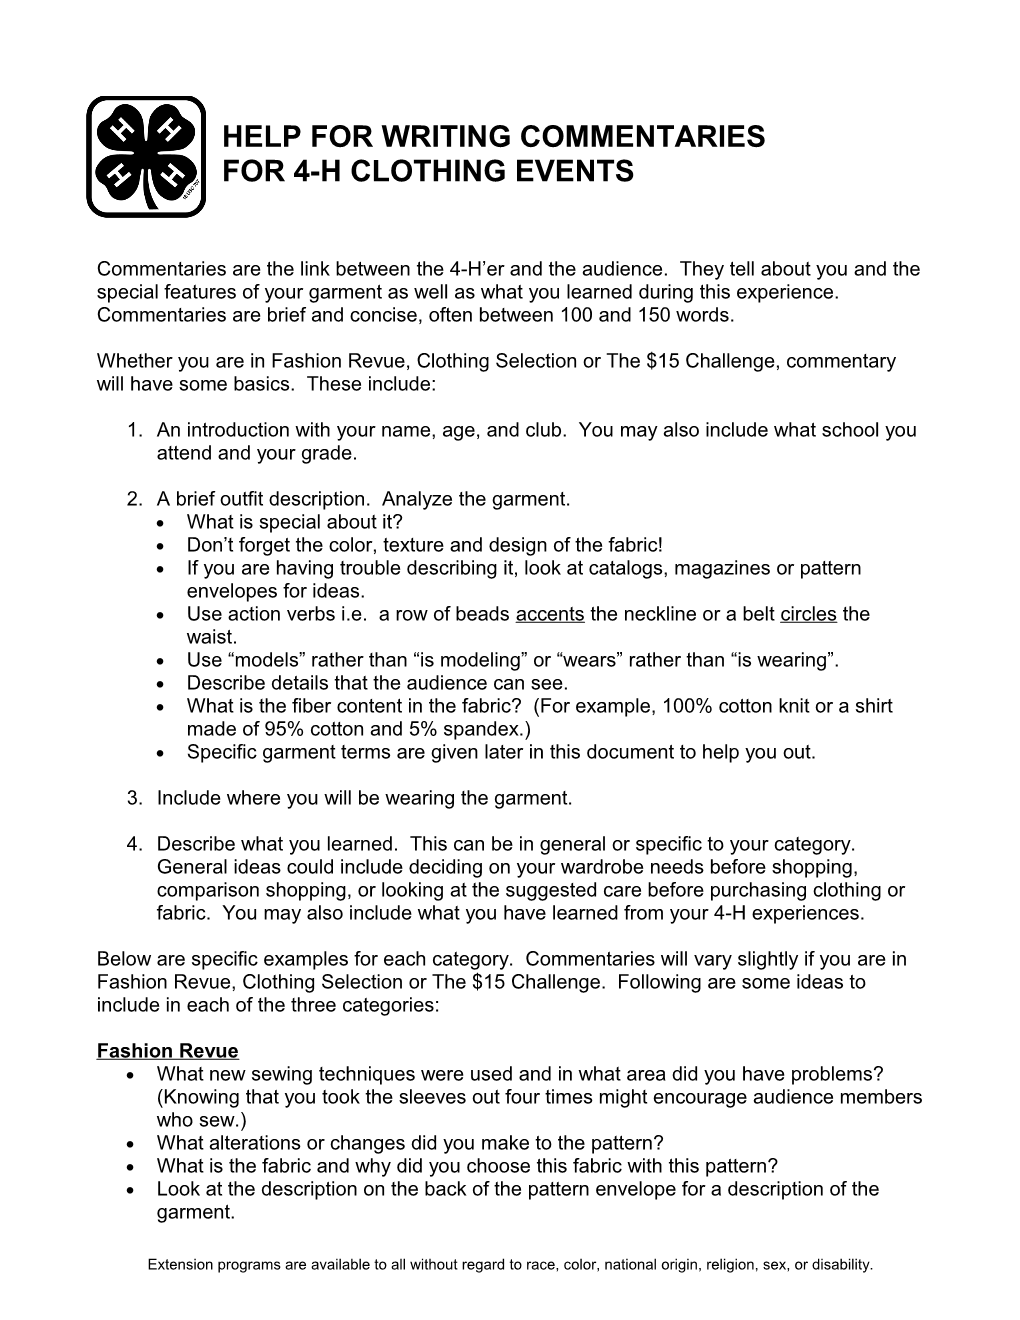 Help for Writing Commentaries for 4-H Clothing Events